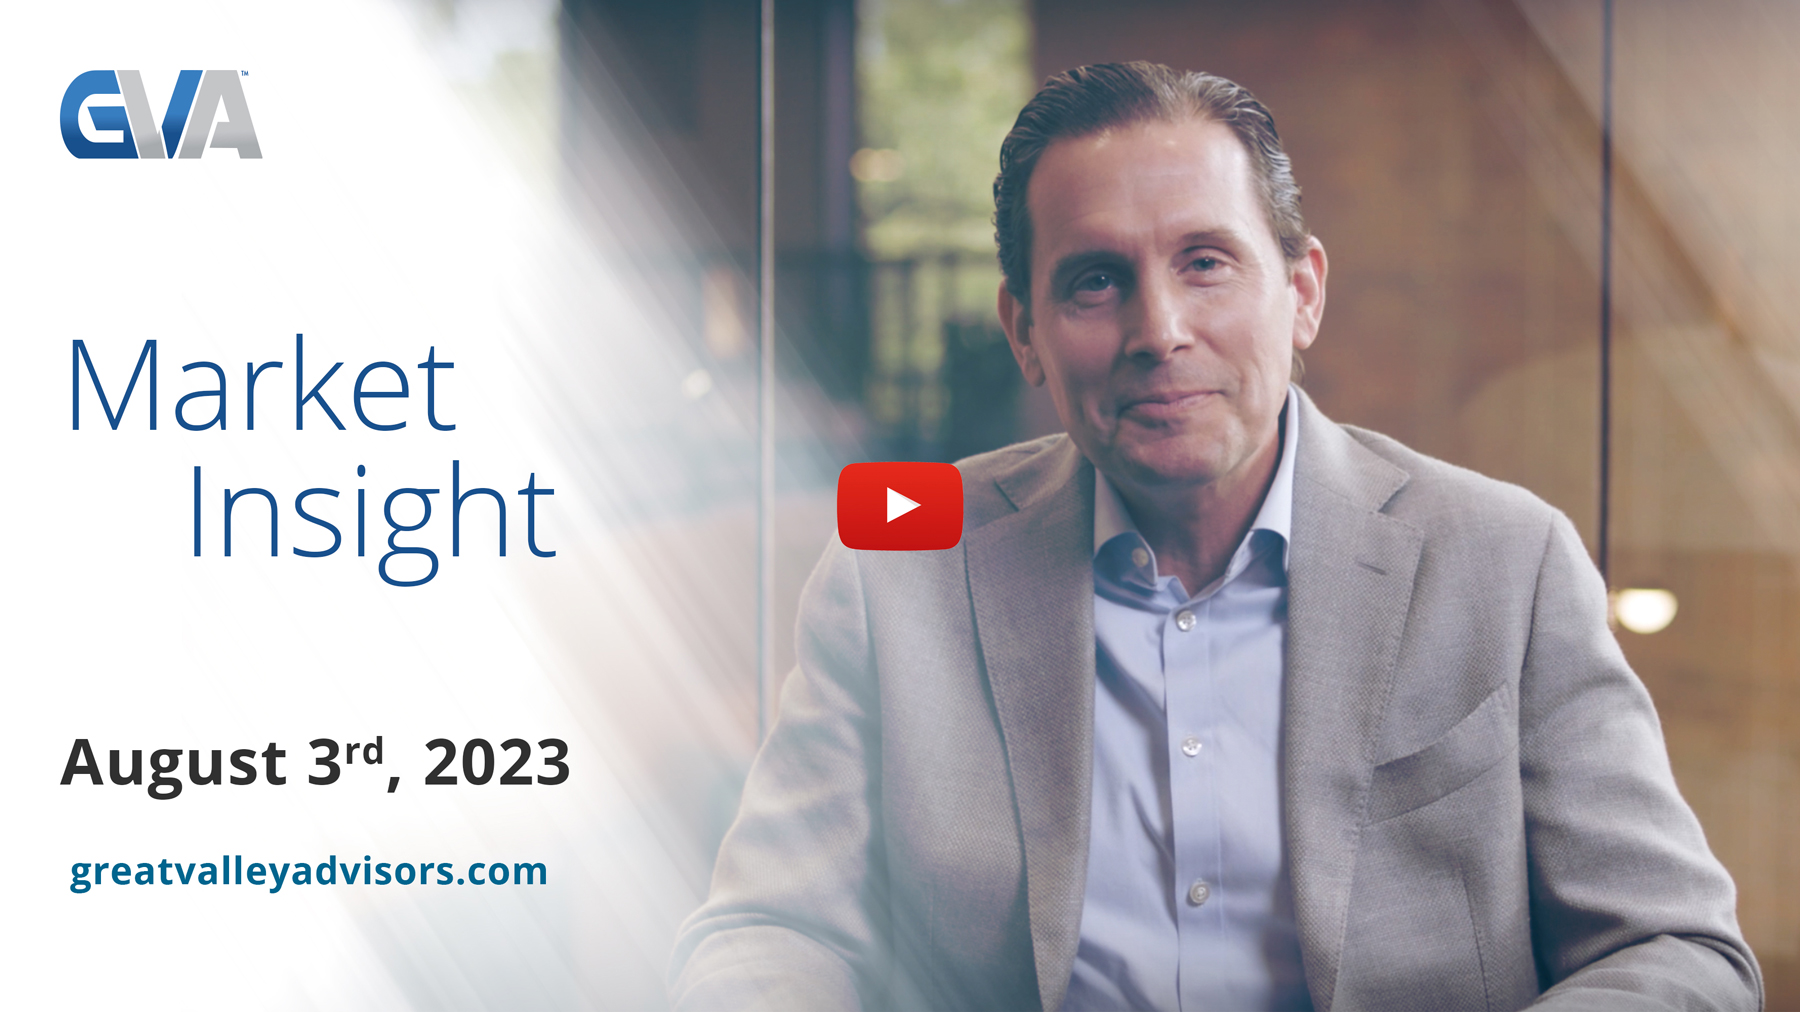 Market Insights with Eric: Episode 6, August 3rd, 2023